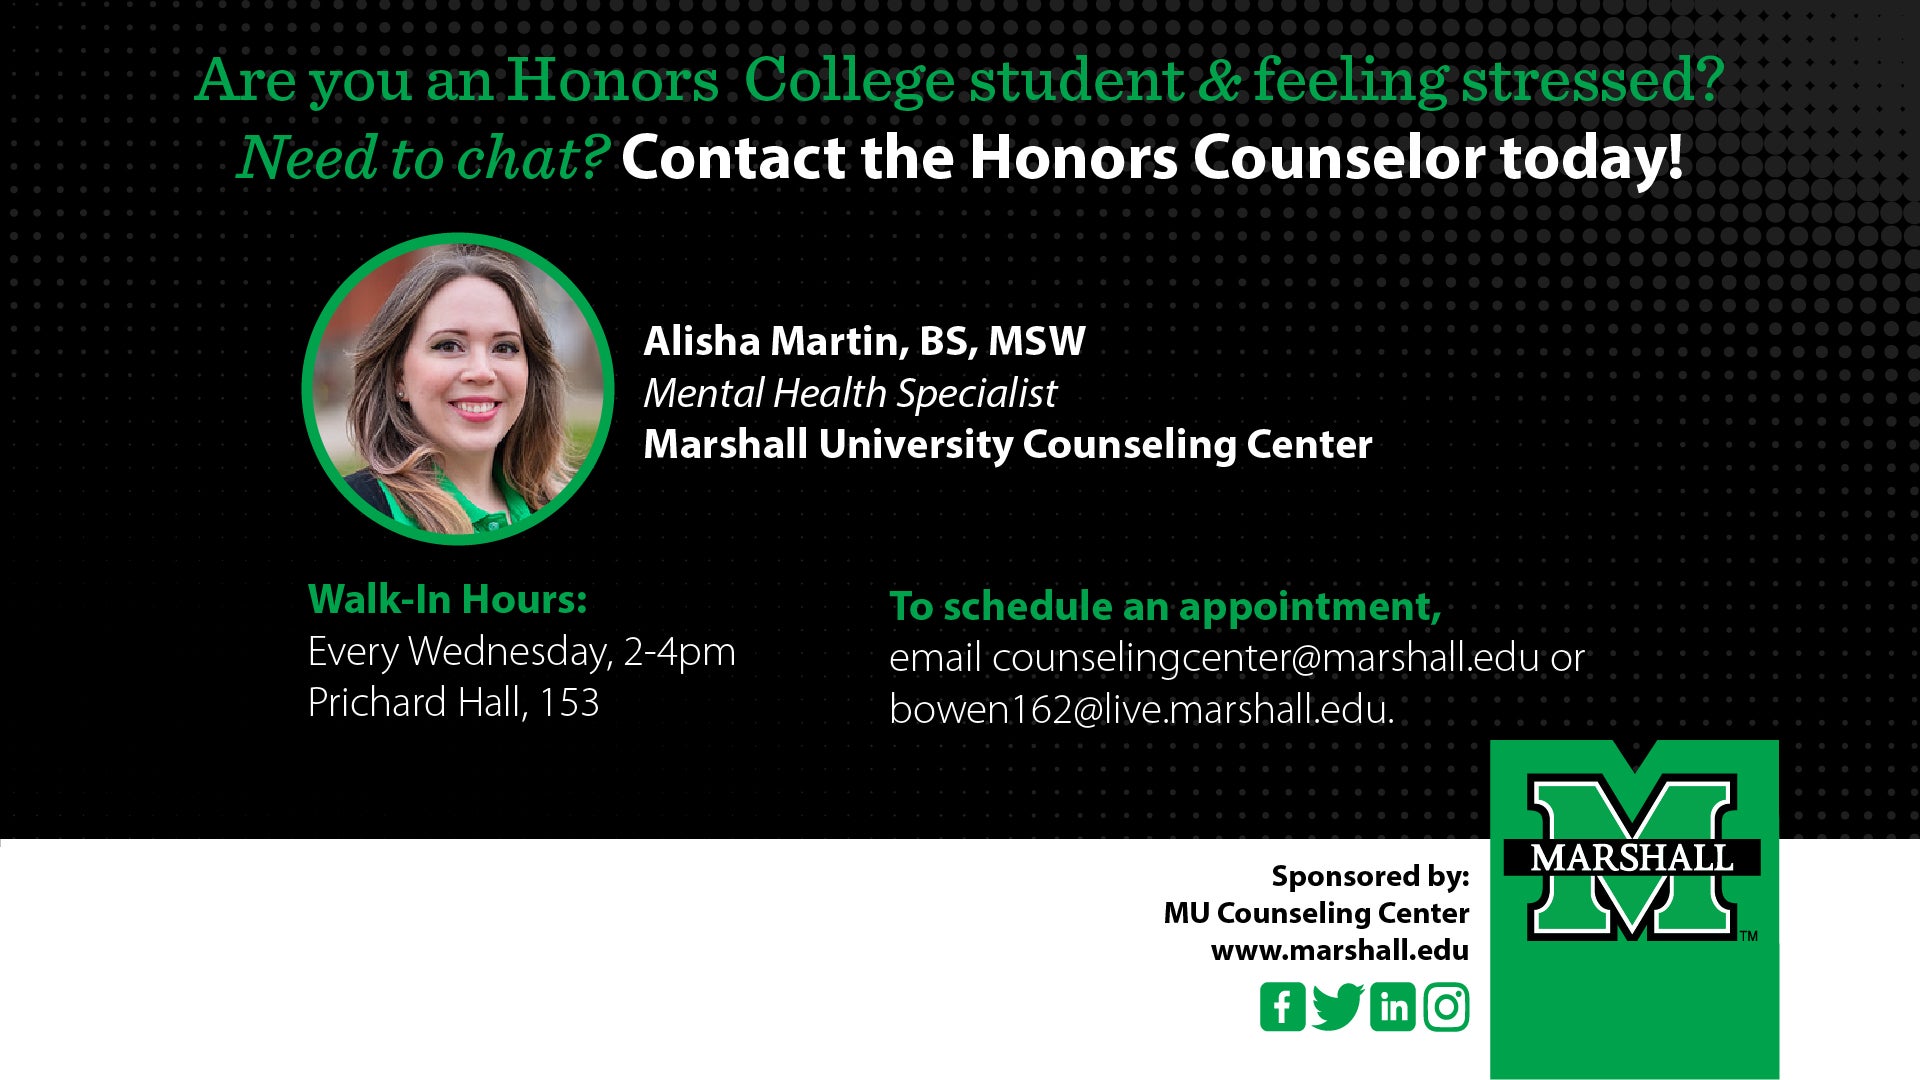 Flyer for the Honors College Counselor